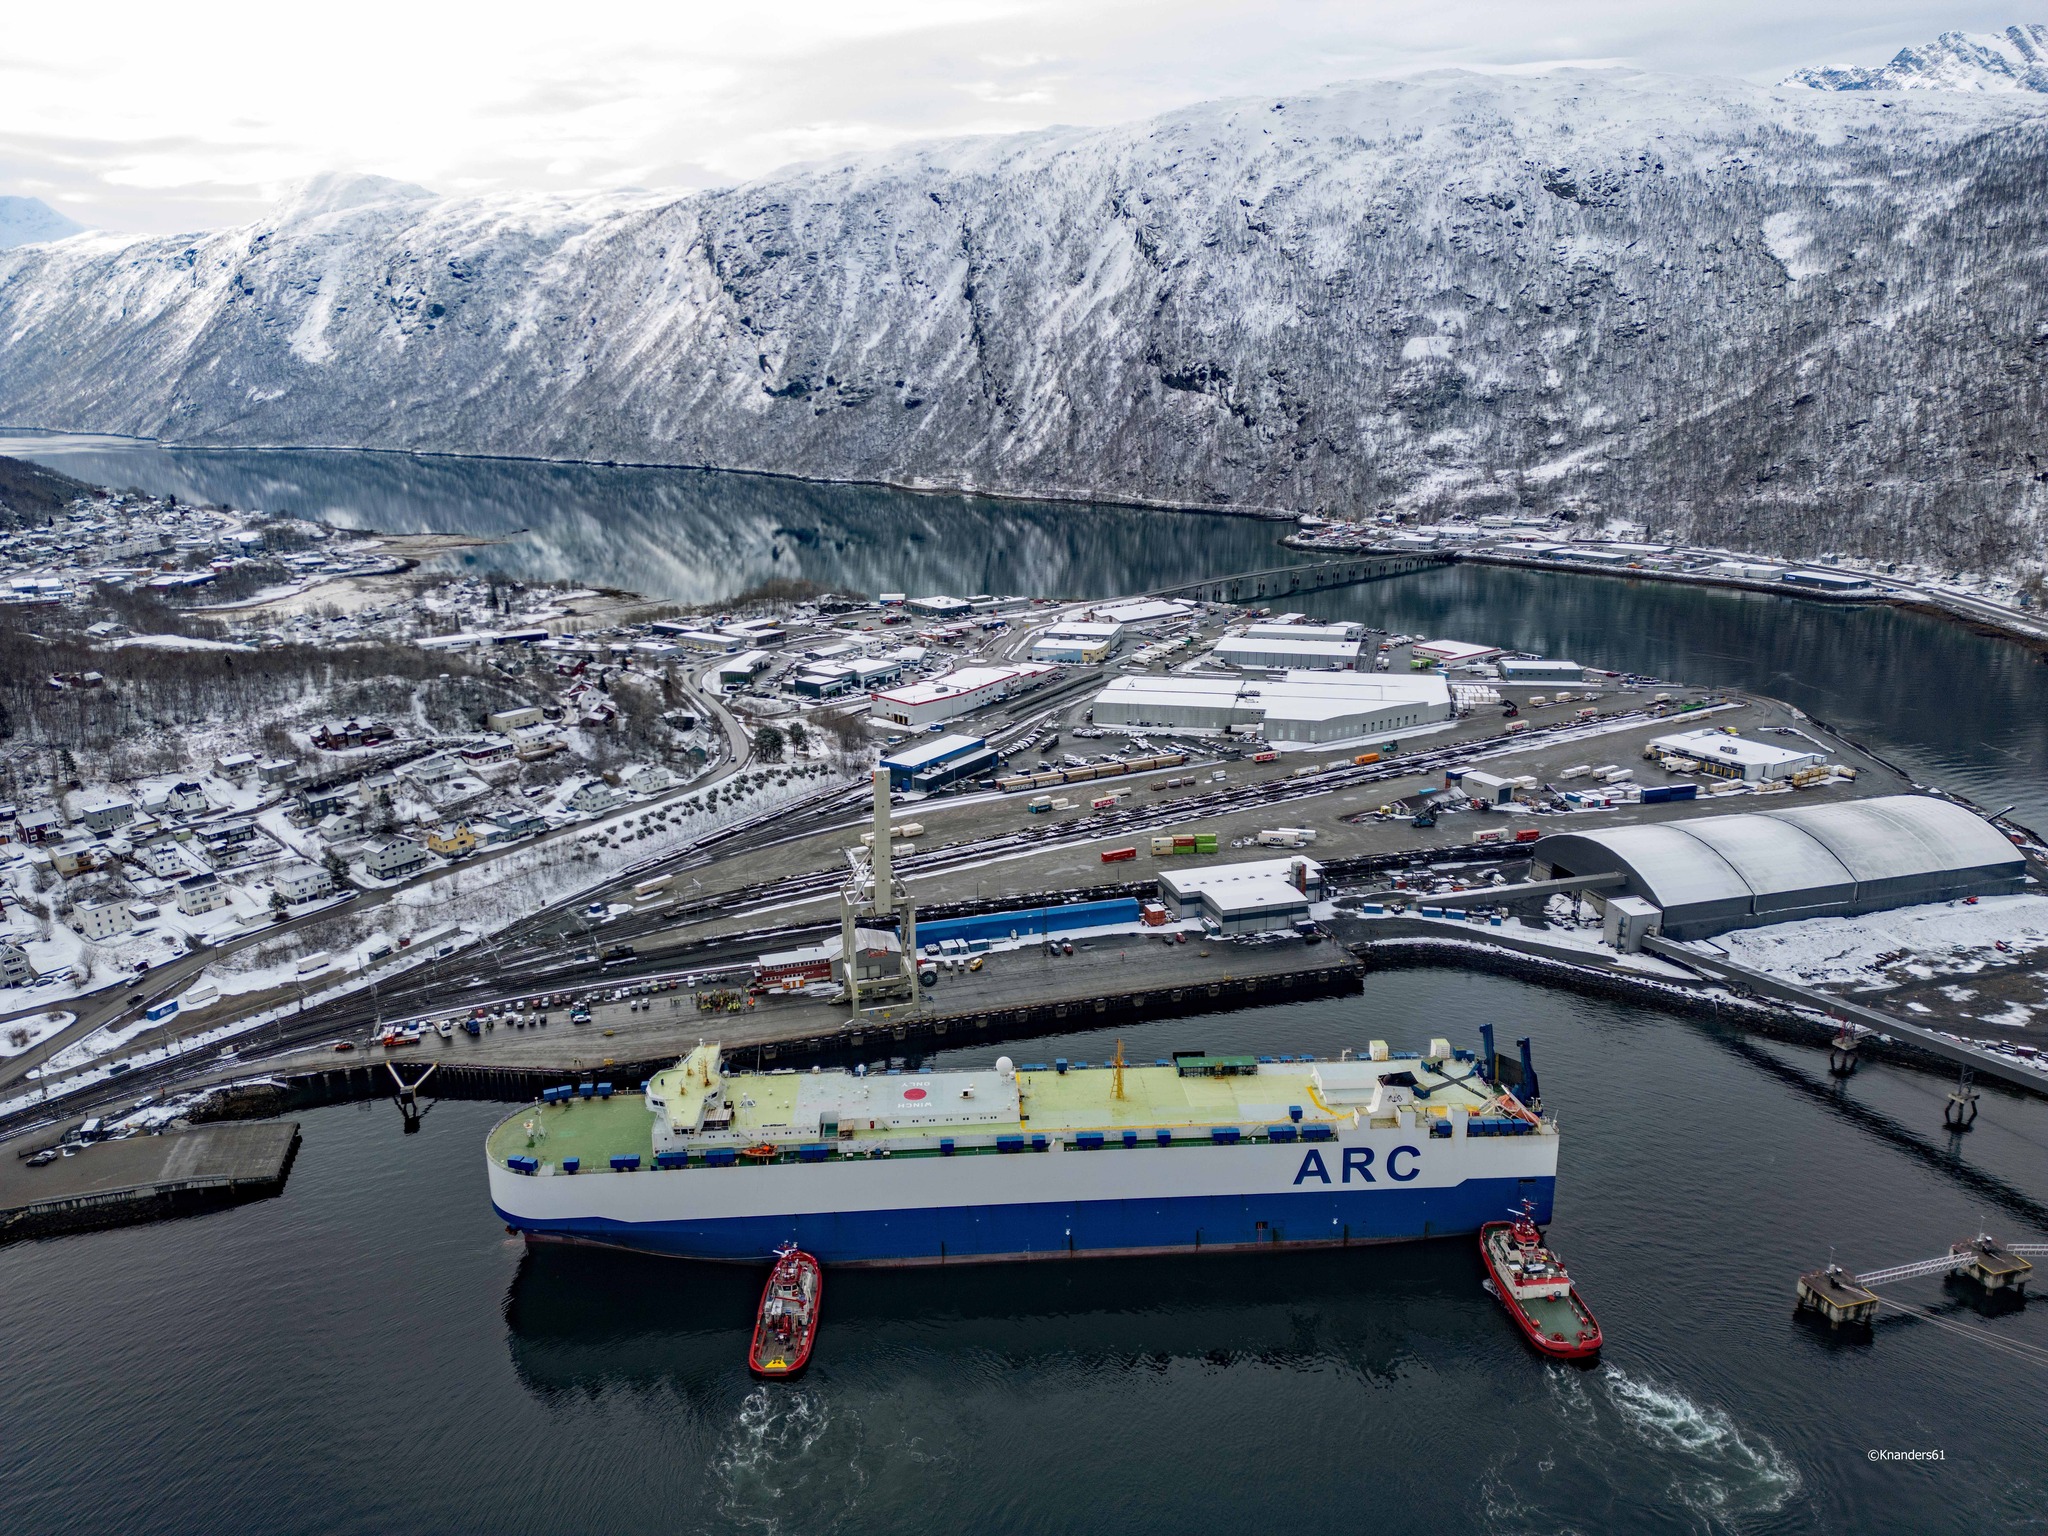 American Roll-On Roll-Off Carrier (ARC) Supports the Deployment of the Patriot Brigade inside the Arctic Circle